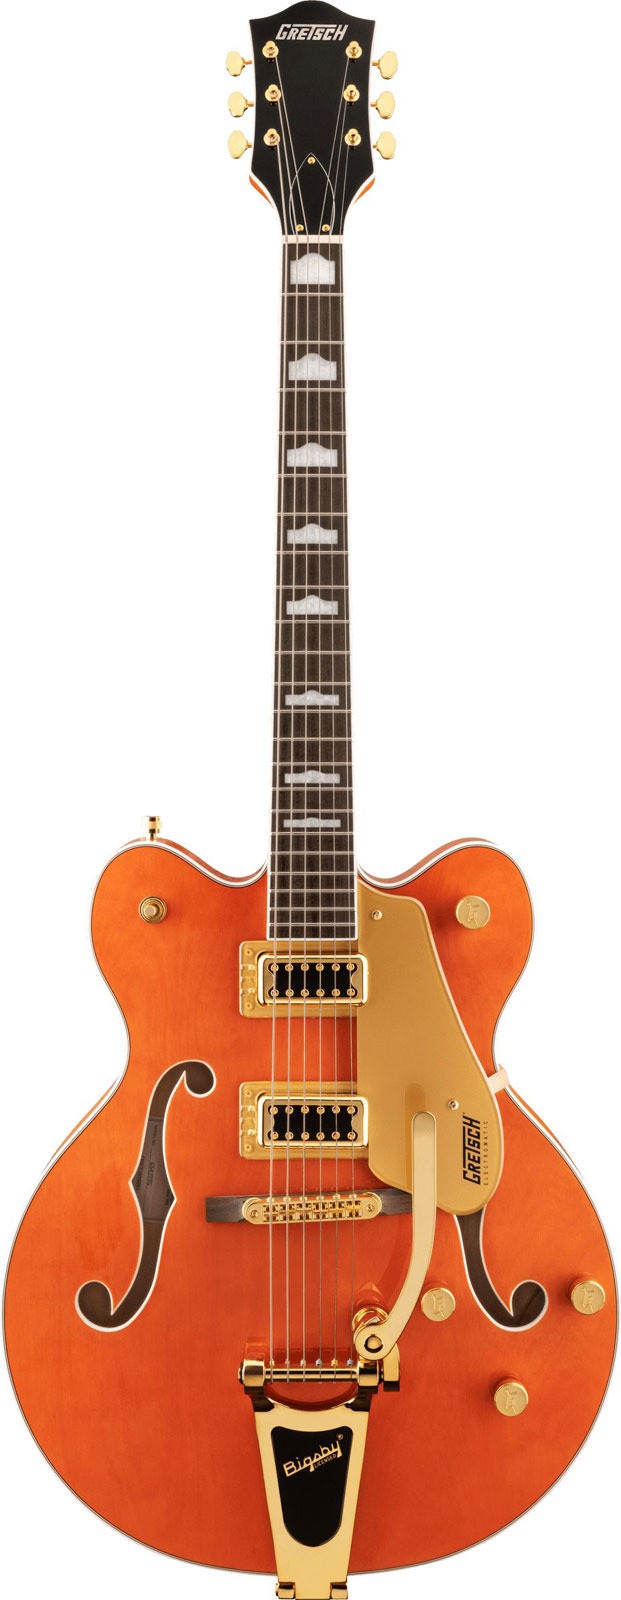 GRETSCH GUITARS G5422TG ELECTROMATIC CLASSIC HOLLOW BODY DOUBLE-CUT WITH BIGSBY AND GOLD HARDWARE LRL ORANGE STAIN